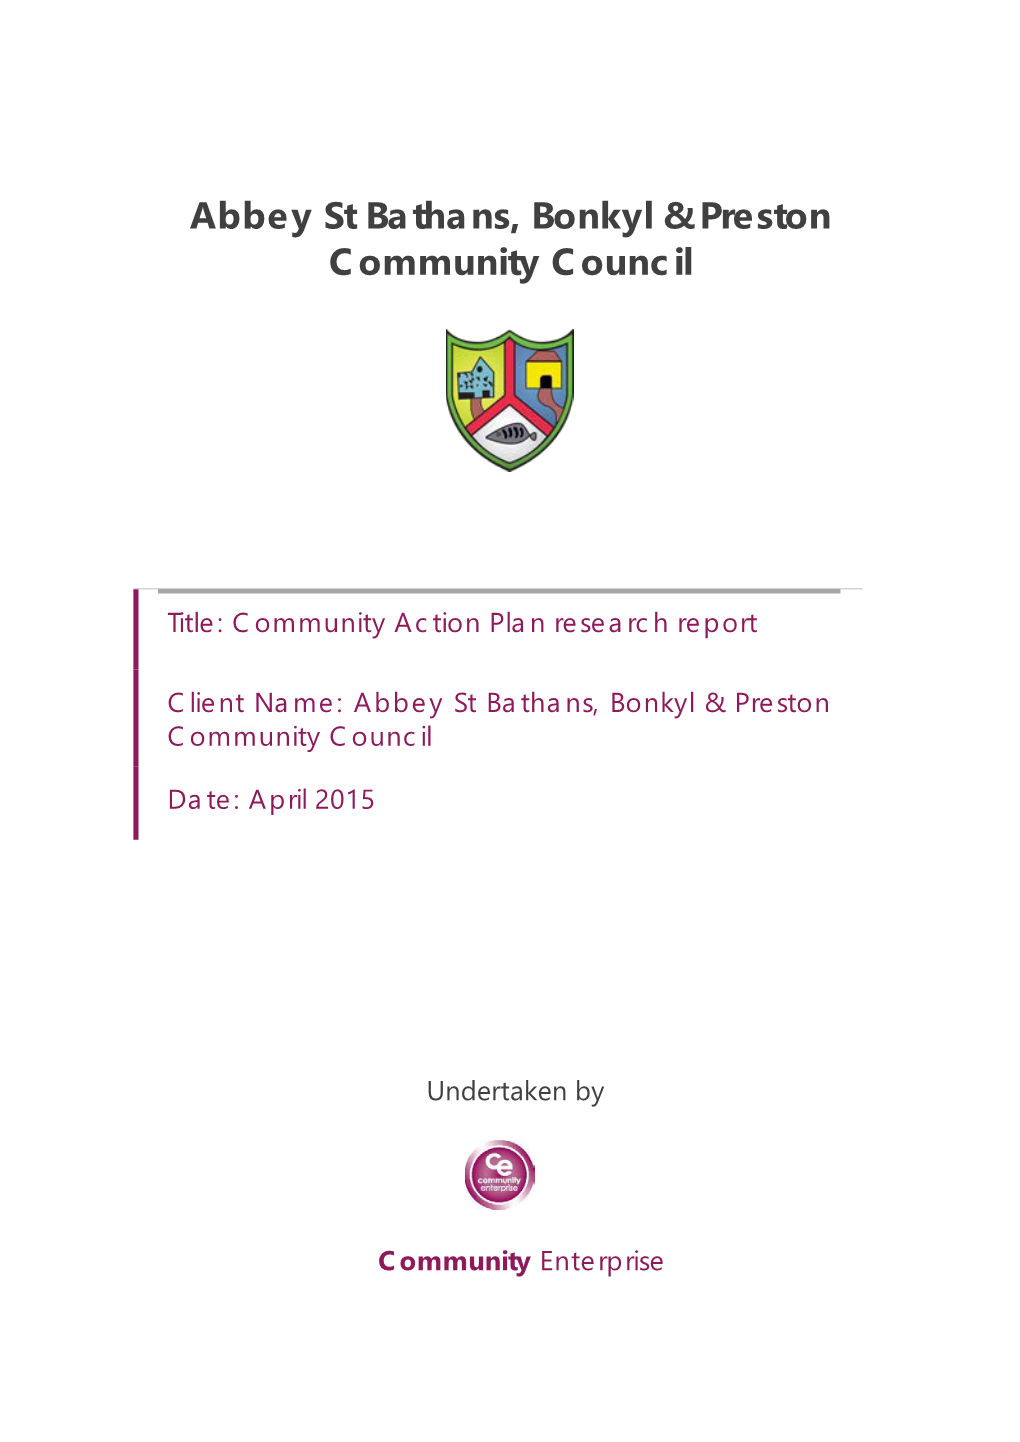 Community Action Plan Research Report